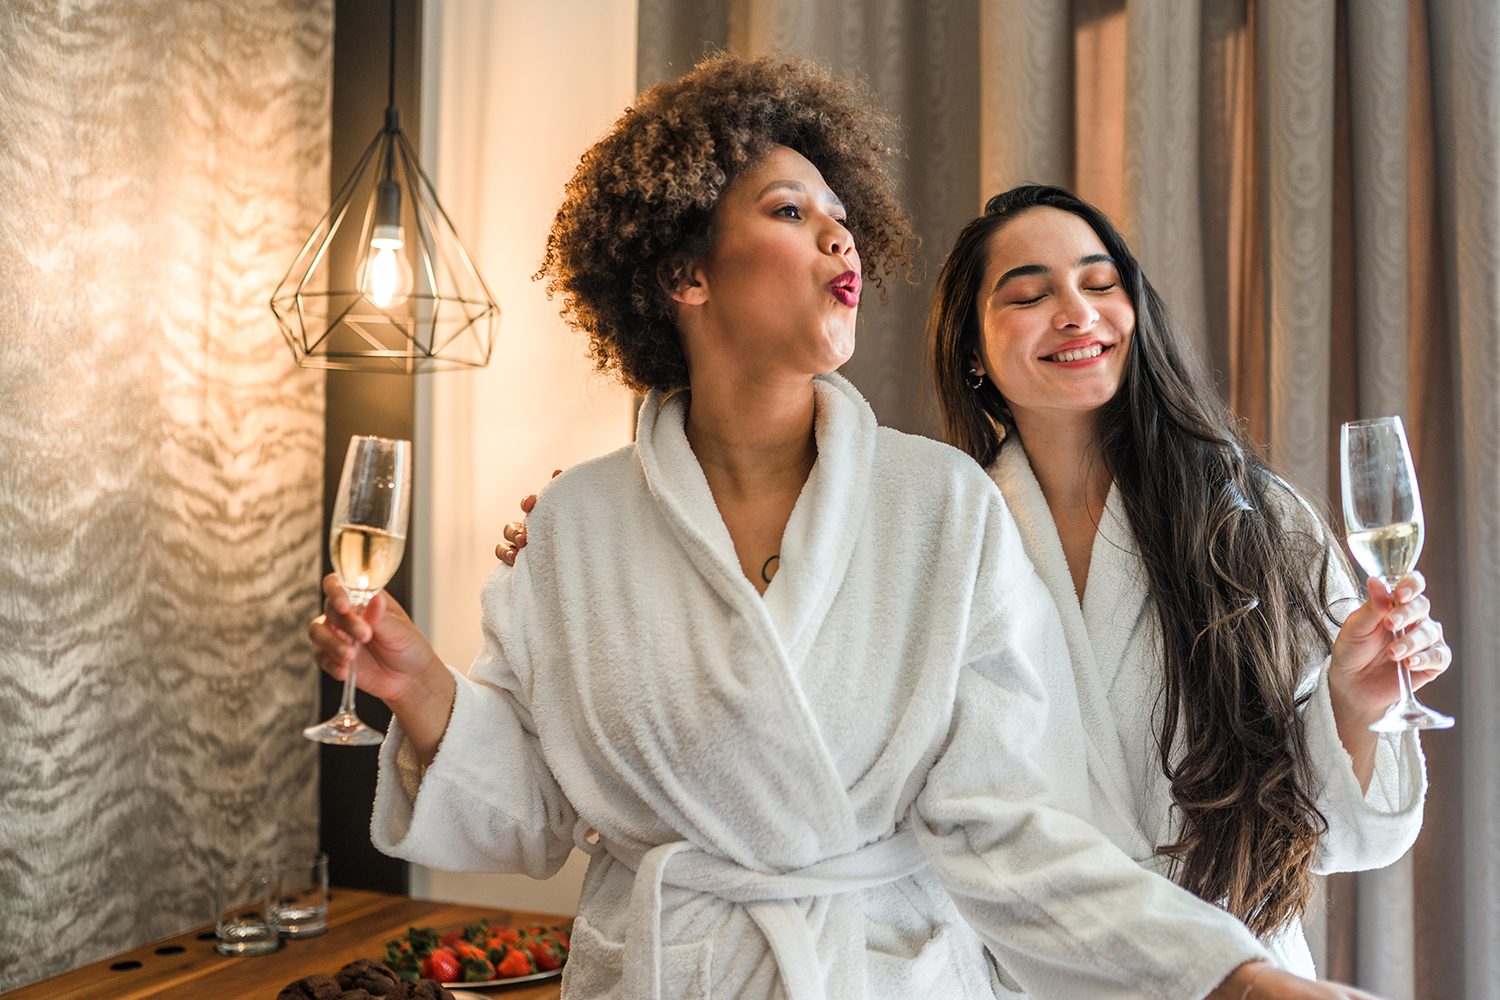 Front view shot of two mixed race young women having fun in a hotel room, drinking their wine, eating chocolate muffins and enjoying their day.